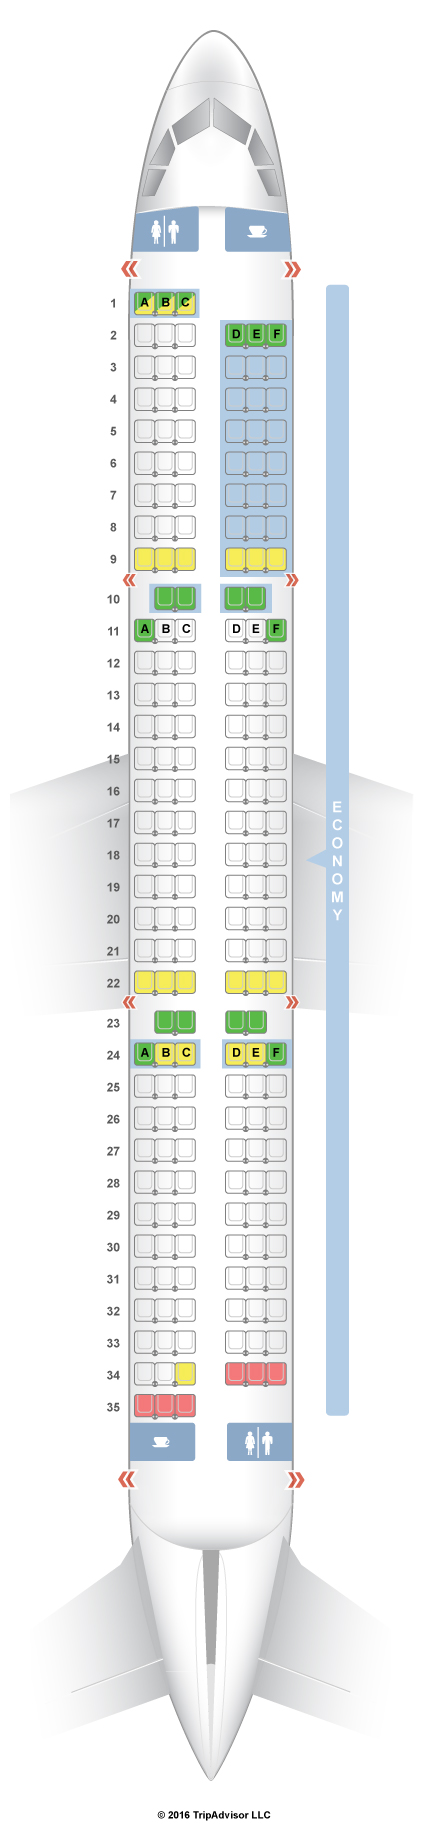 How can you access the Airbus A321 seating chart?